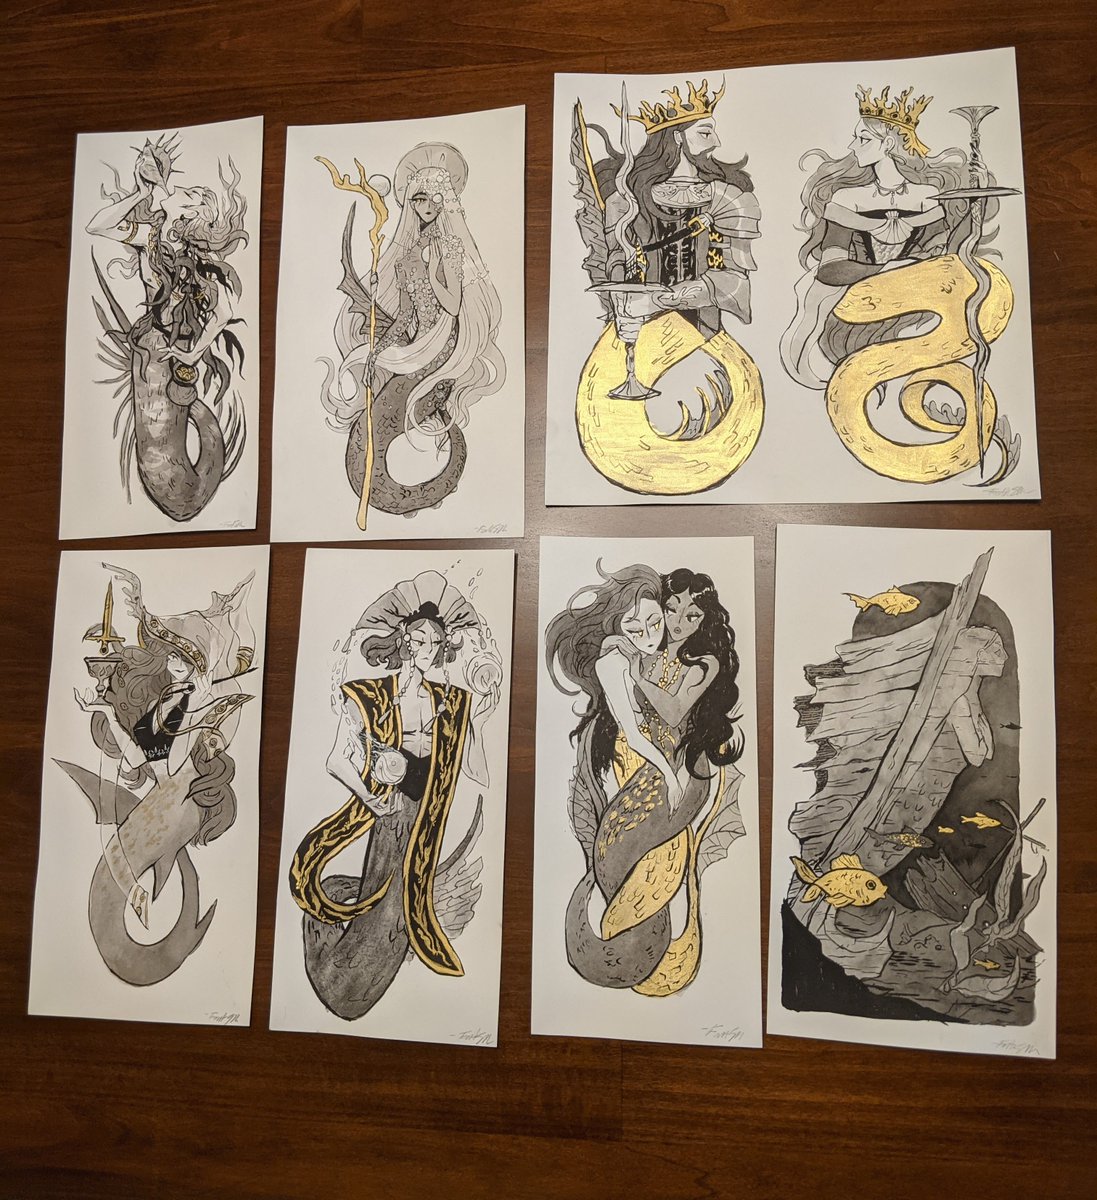 Batch 1 of my Mermay Tarot originals go live tomorrow, 5/15 at 9AM pacific! 🧜‍♀️🧜‍♂️🧜 
Here's what will be in the first batch, you can check out the sale preview for more details here:
https://t.co/31H13pwbOf
And here's the link for my shop when it goes live:
https://t.co/kq3aM15Qym 